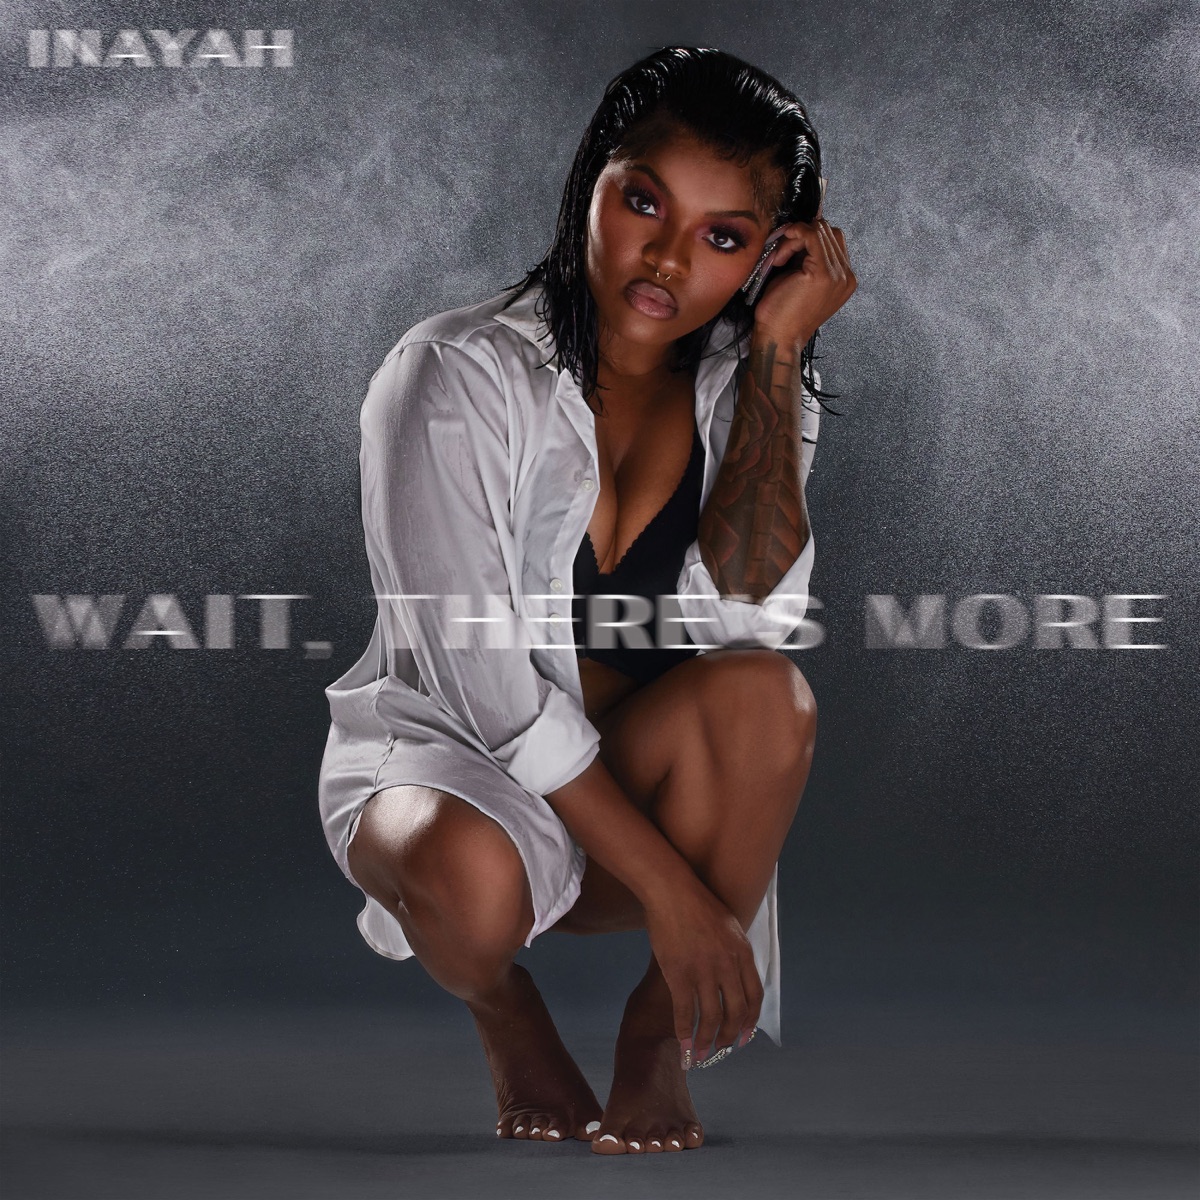 Inayah - Wait, There'S More Album 1